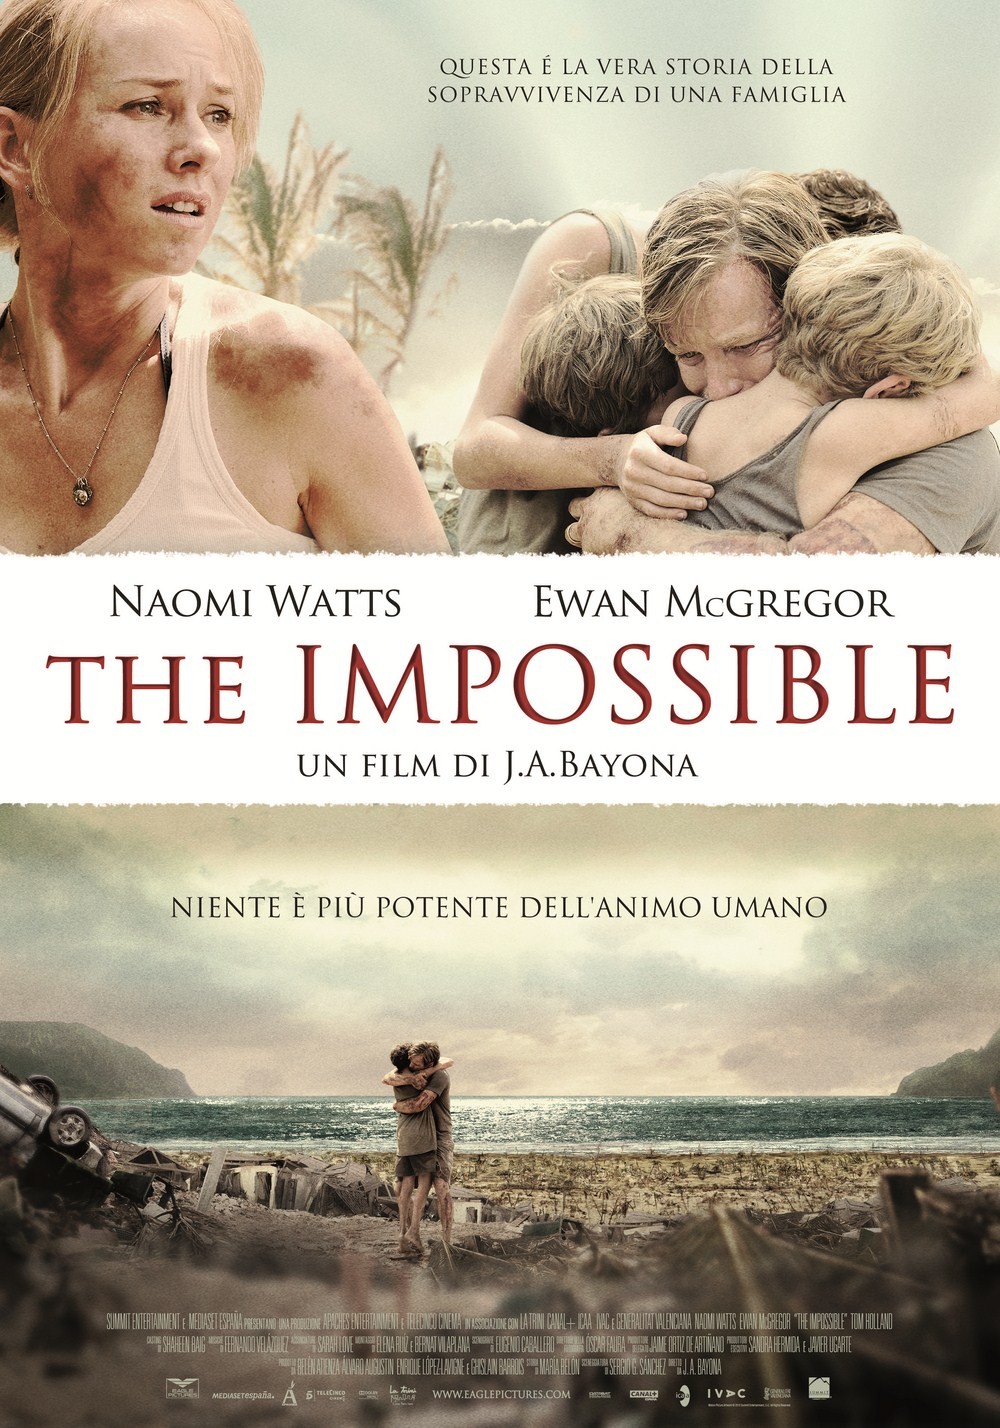 THE IMPOSSIBLE: Extra Large Movie Poster Image - Internet Movie.